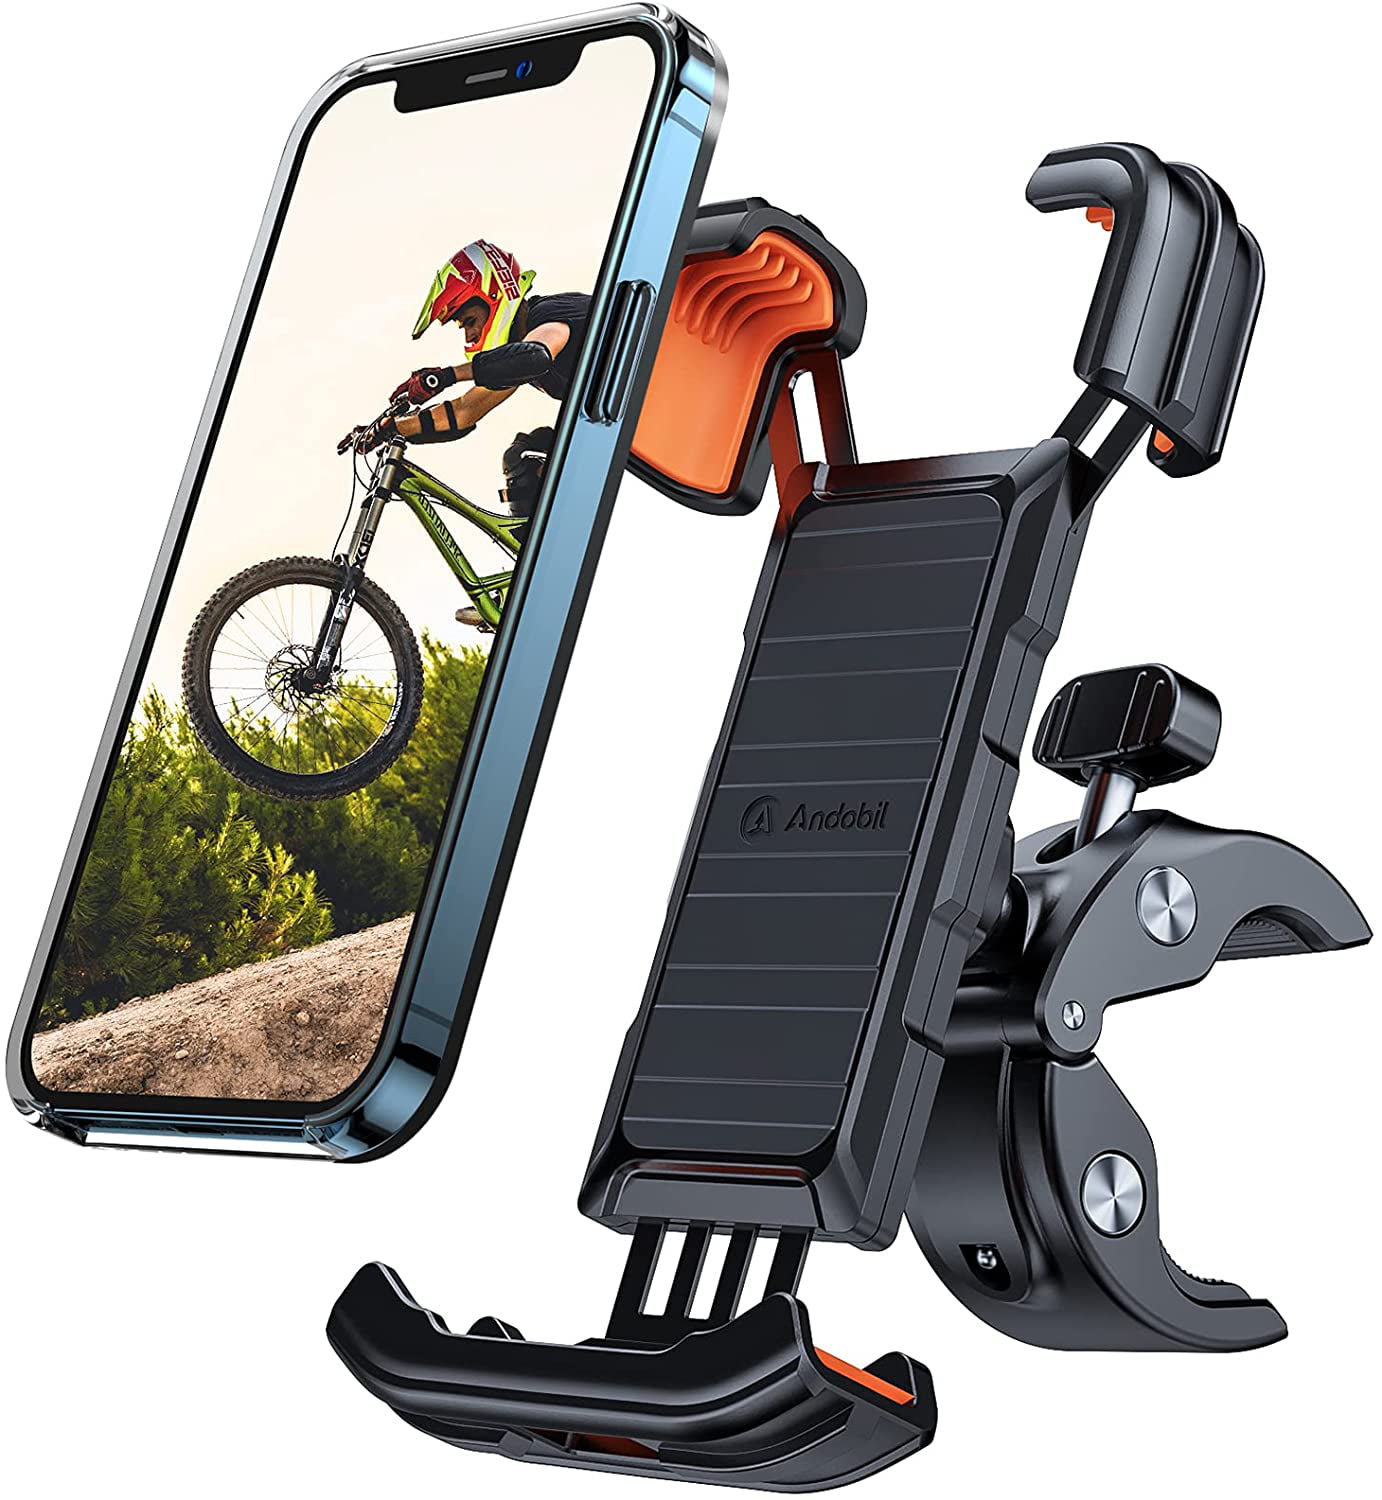 Galaxy S9 Bike Phone Mount 2.3-3.35 Wide Folding Motorcycle Phone Holder Aluminum Universal Cell Phone Bicycle Stand for iPhone 12 / iPhone 12 Pro Max Note 20 and More 4.7-6.8 Cellphone S1 